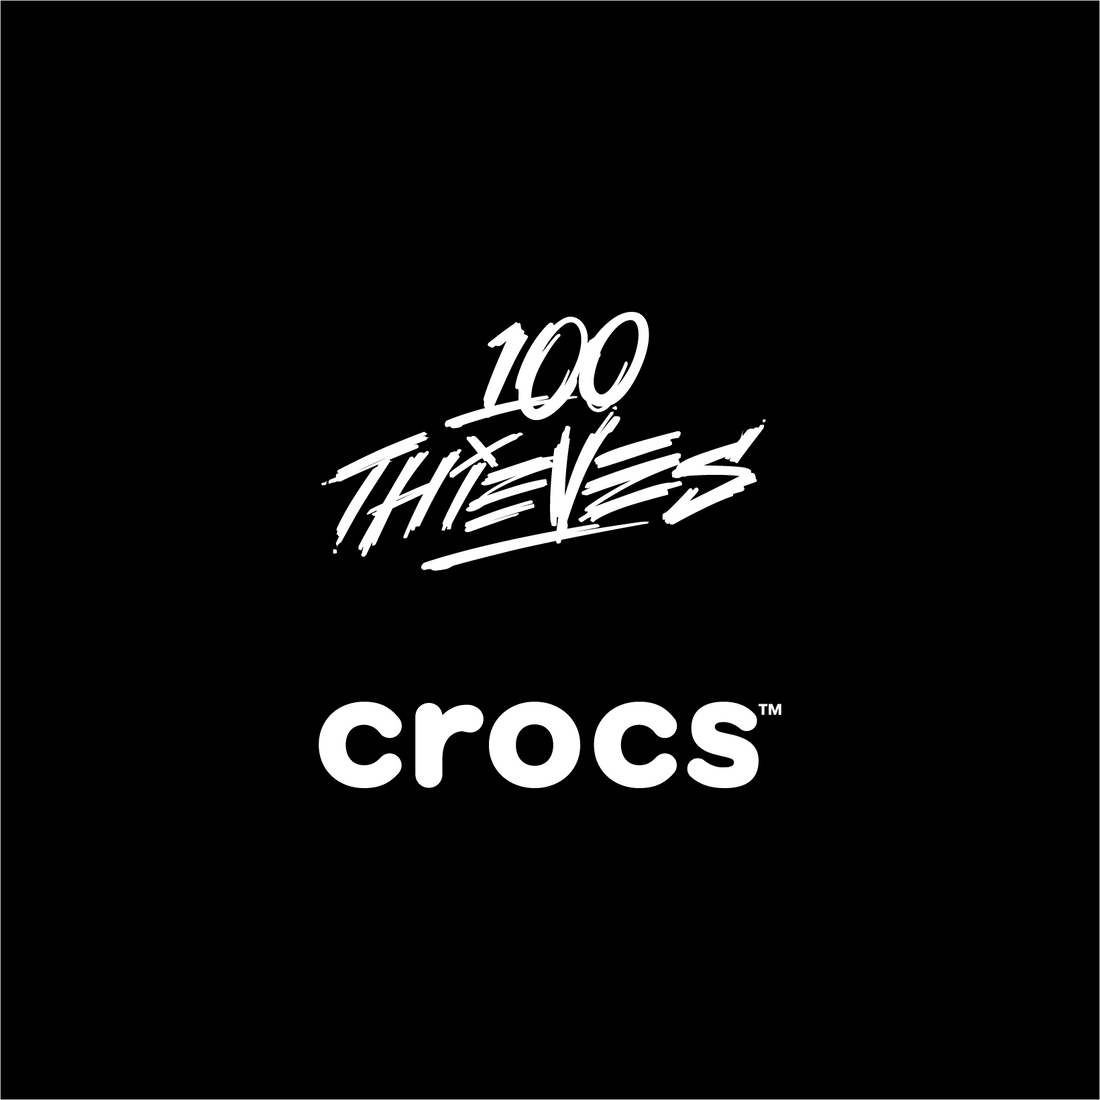 Crocs Partners with 100 Thieves League of Legends